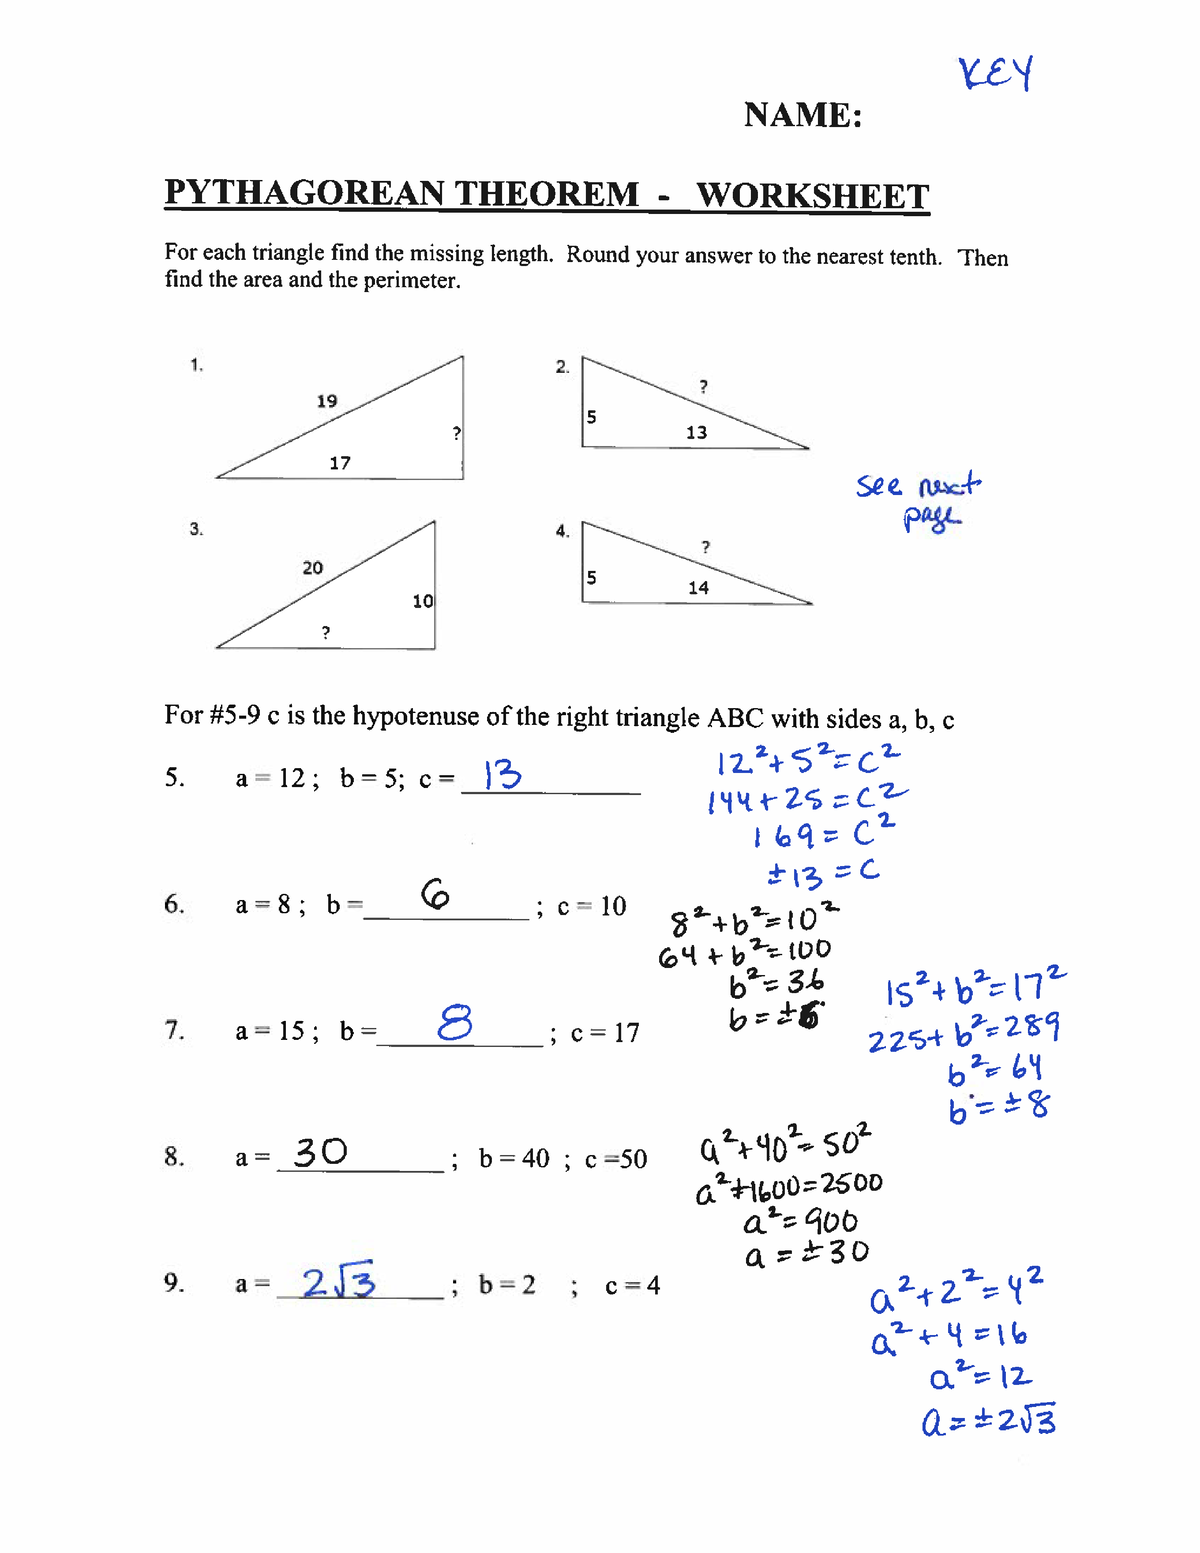 pythagorean theorem converse and inequalities assignment answer key